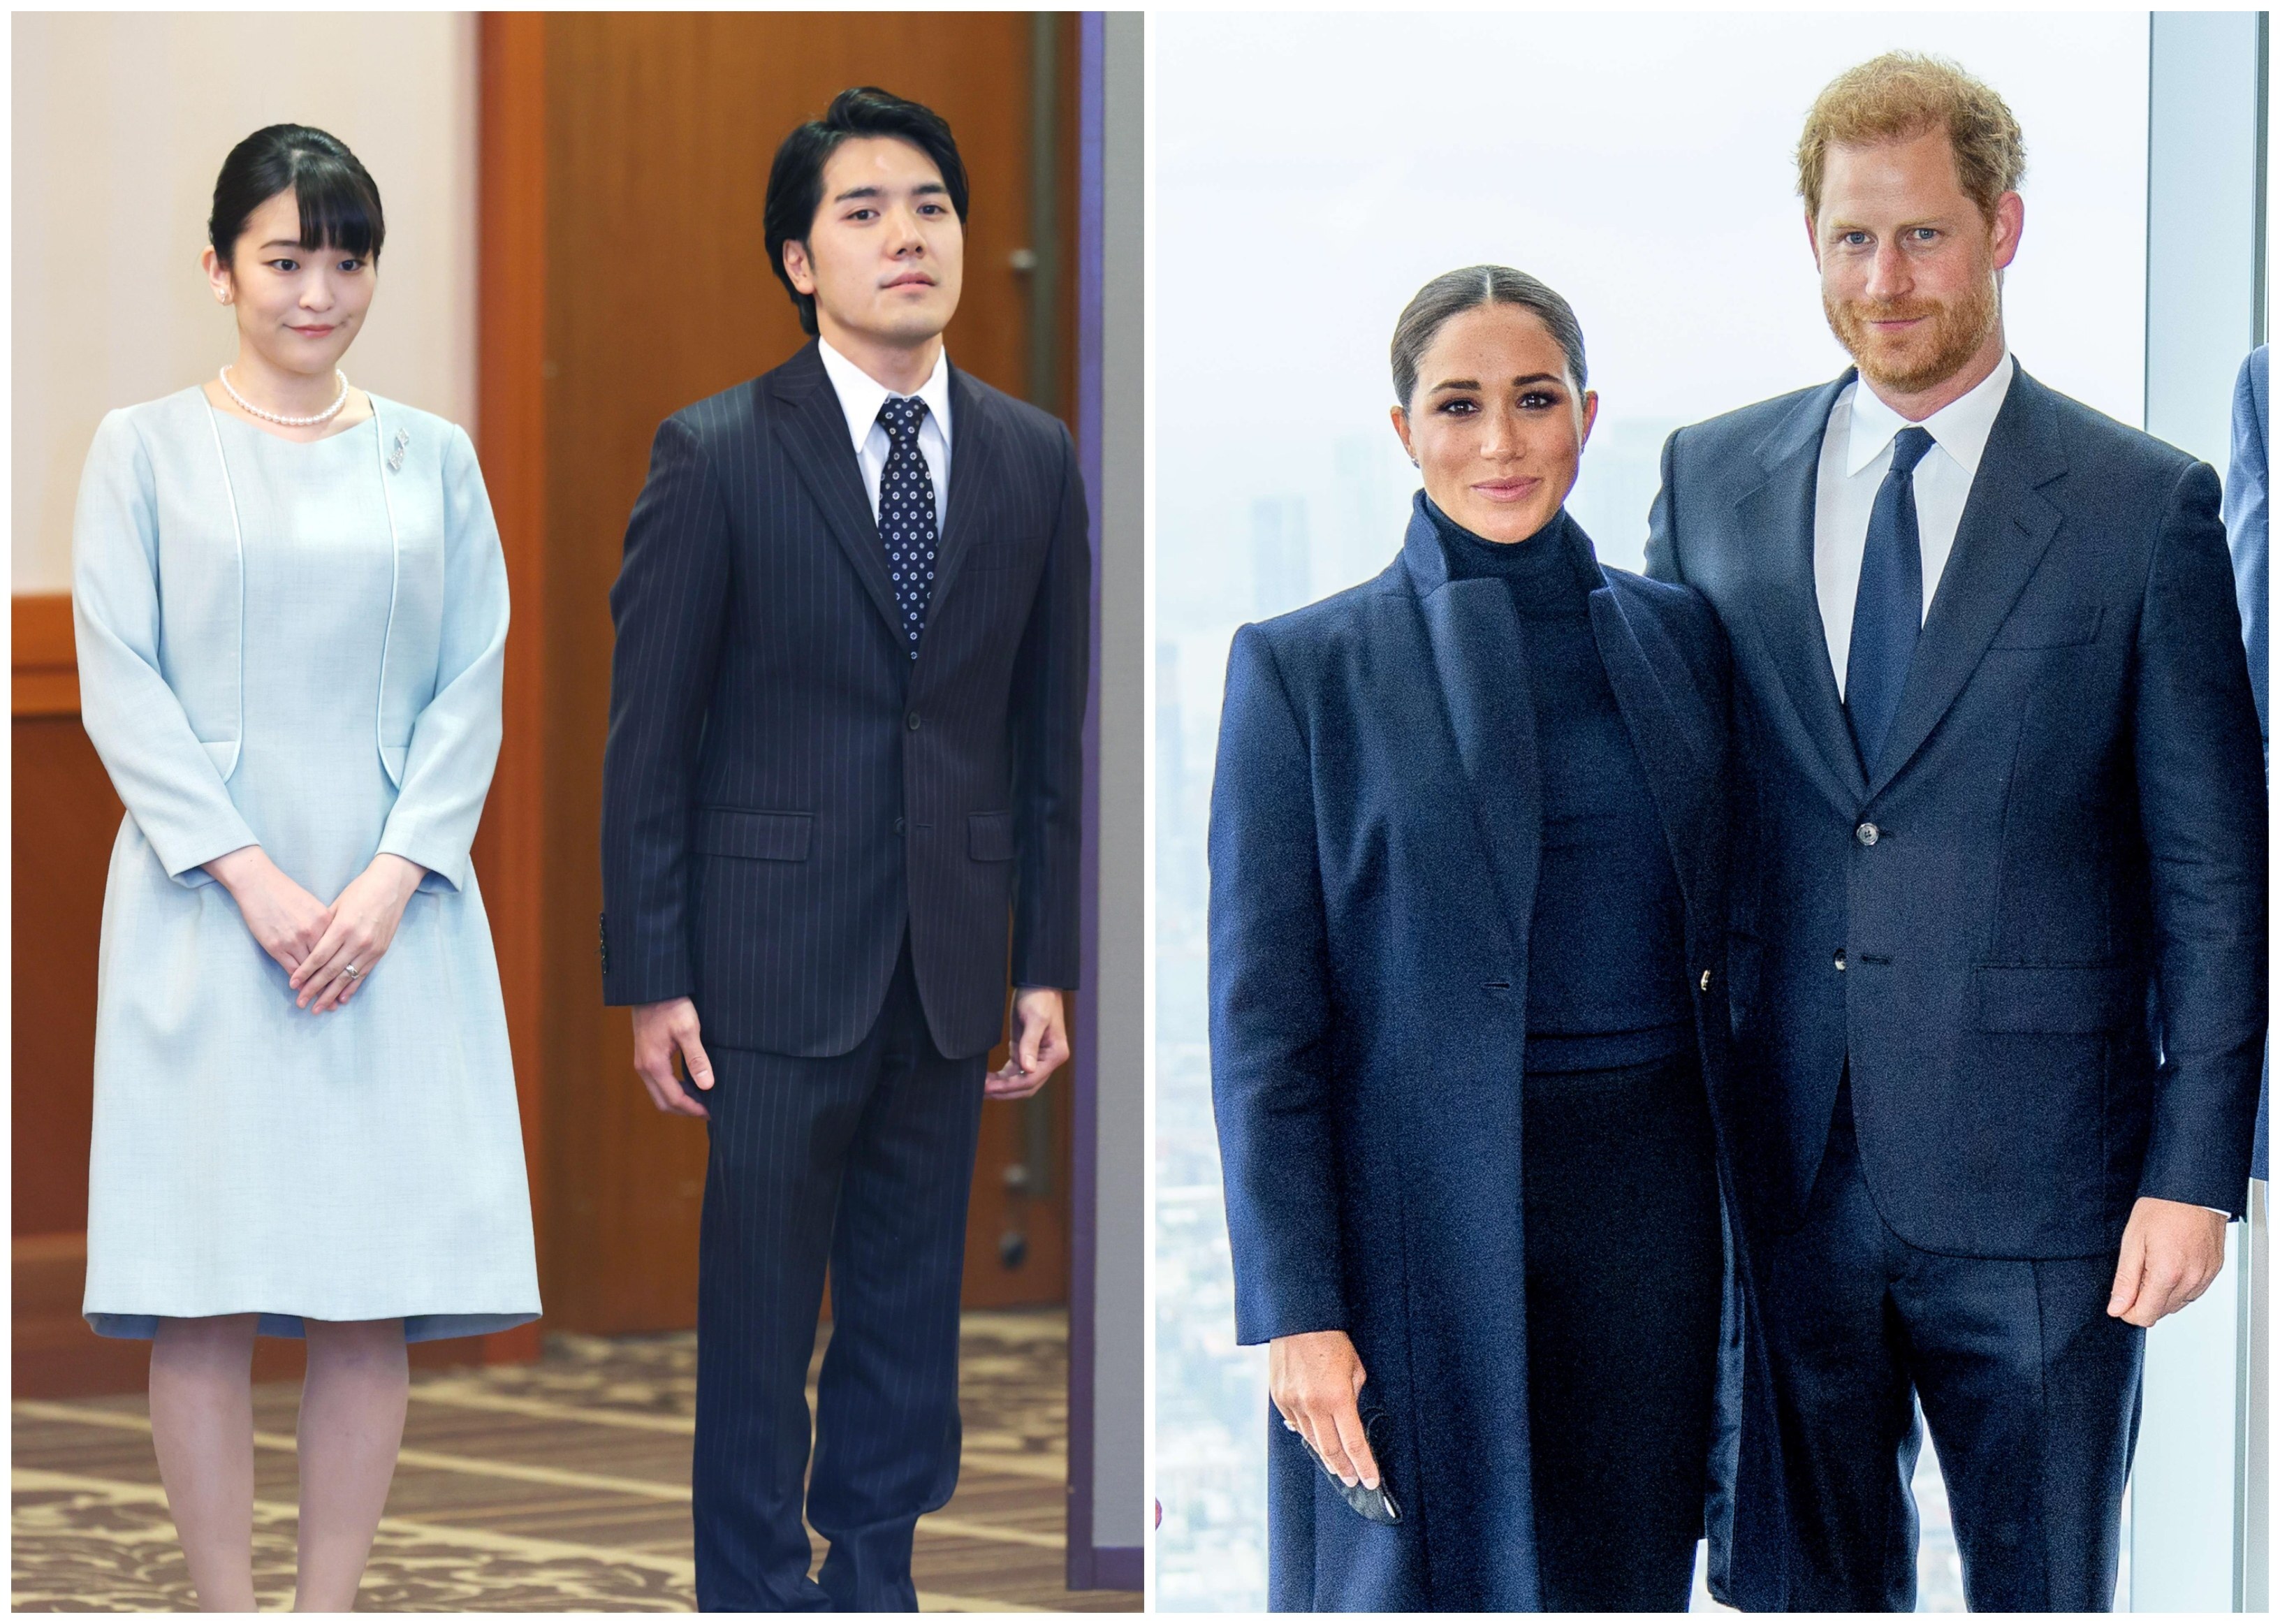 Princess Mako and Kei Komuro, and Meghan Markle and Prince Harry, decided to eschew a life of royal privilege to carve their own paths. Photos: Kyodo, AFP